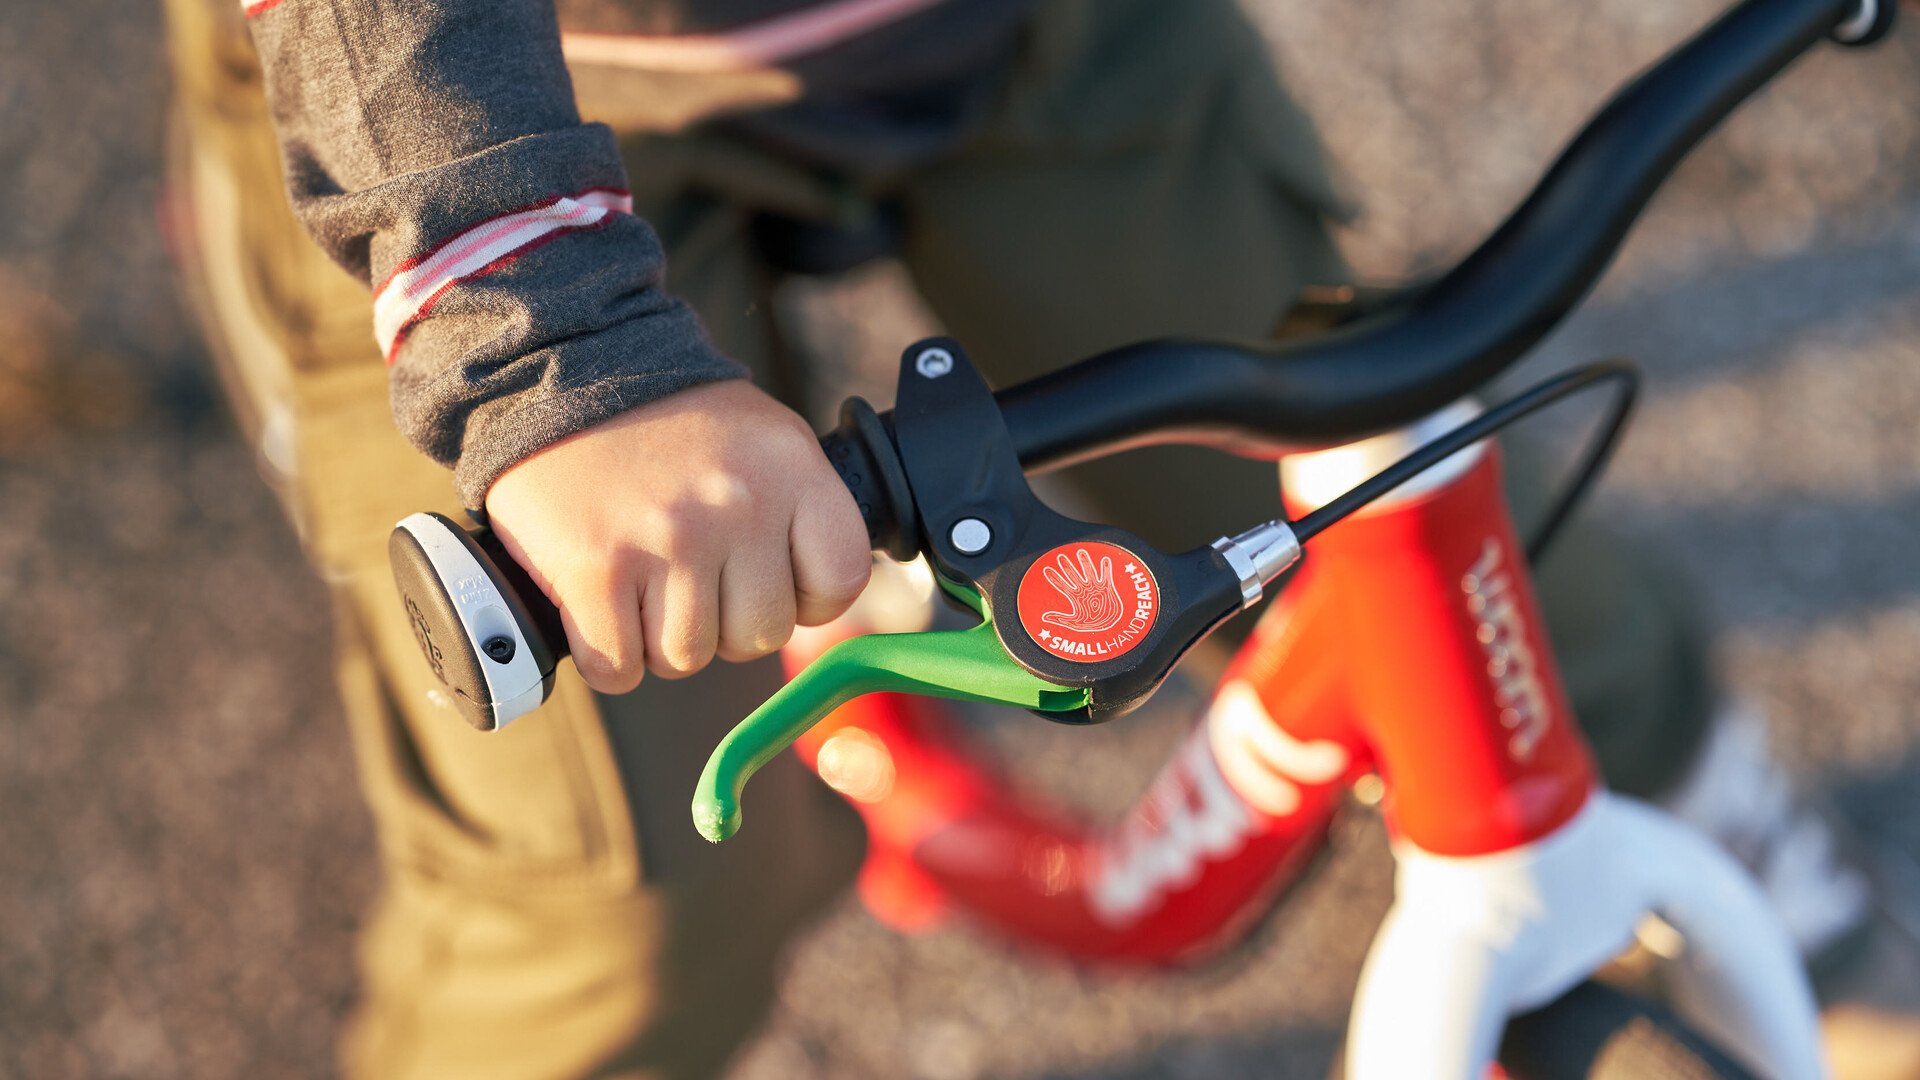 A detailed image of the handlebars and the green brake lever for the rear brake on a red woom balance bike.